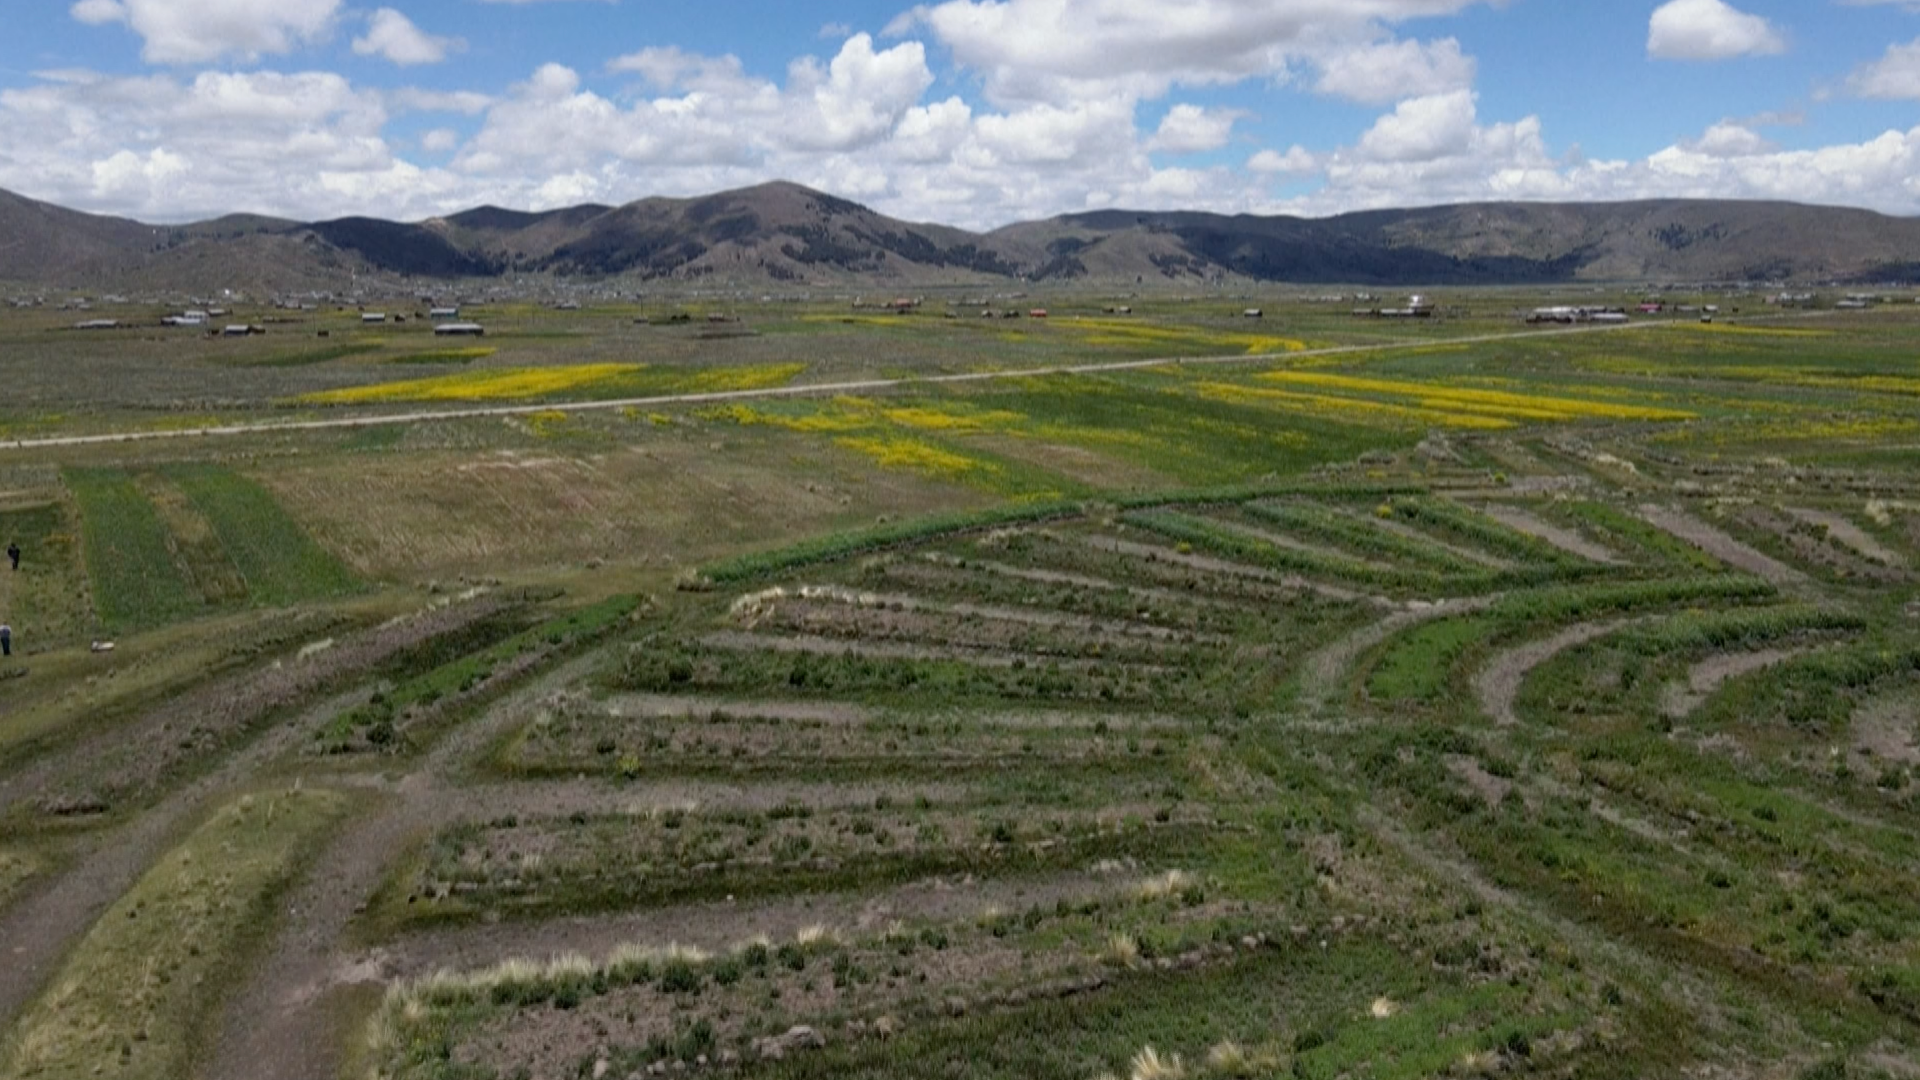 Farmers in the Andes Utilize Ancient Method in Response to Climate Change